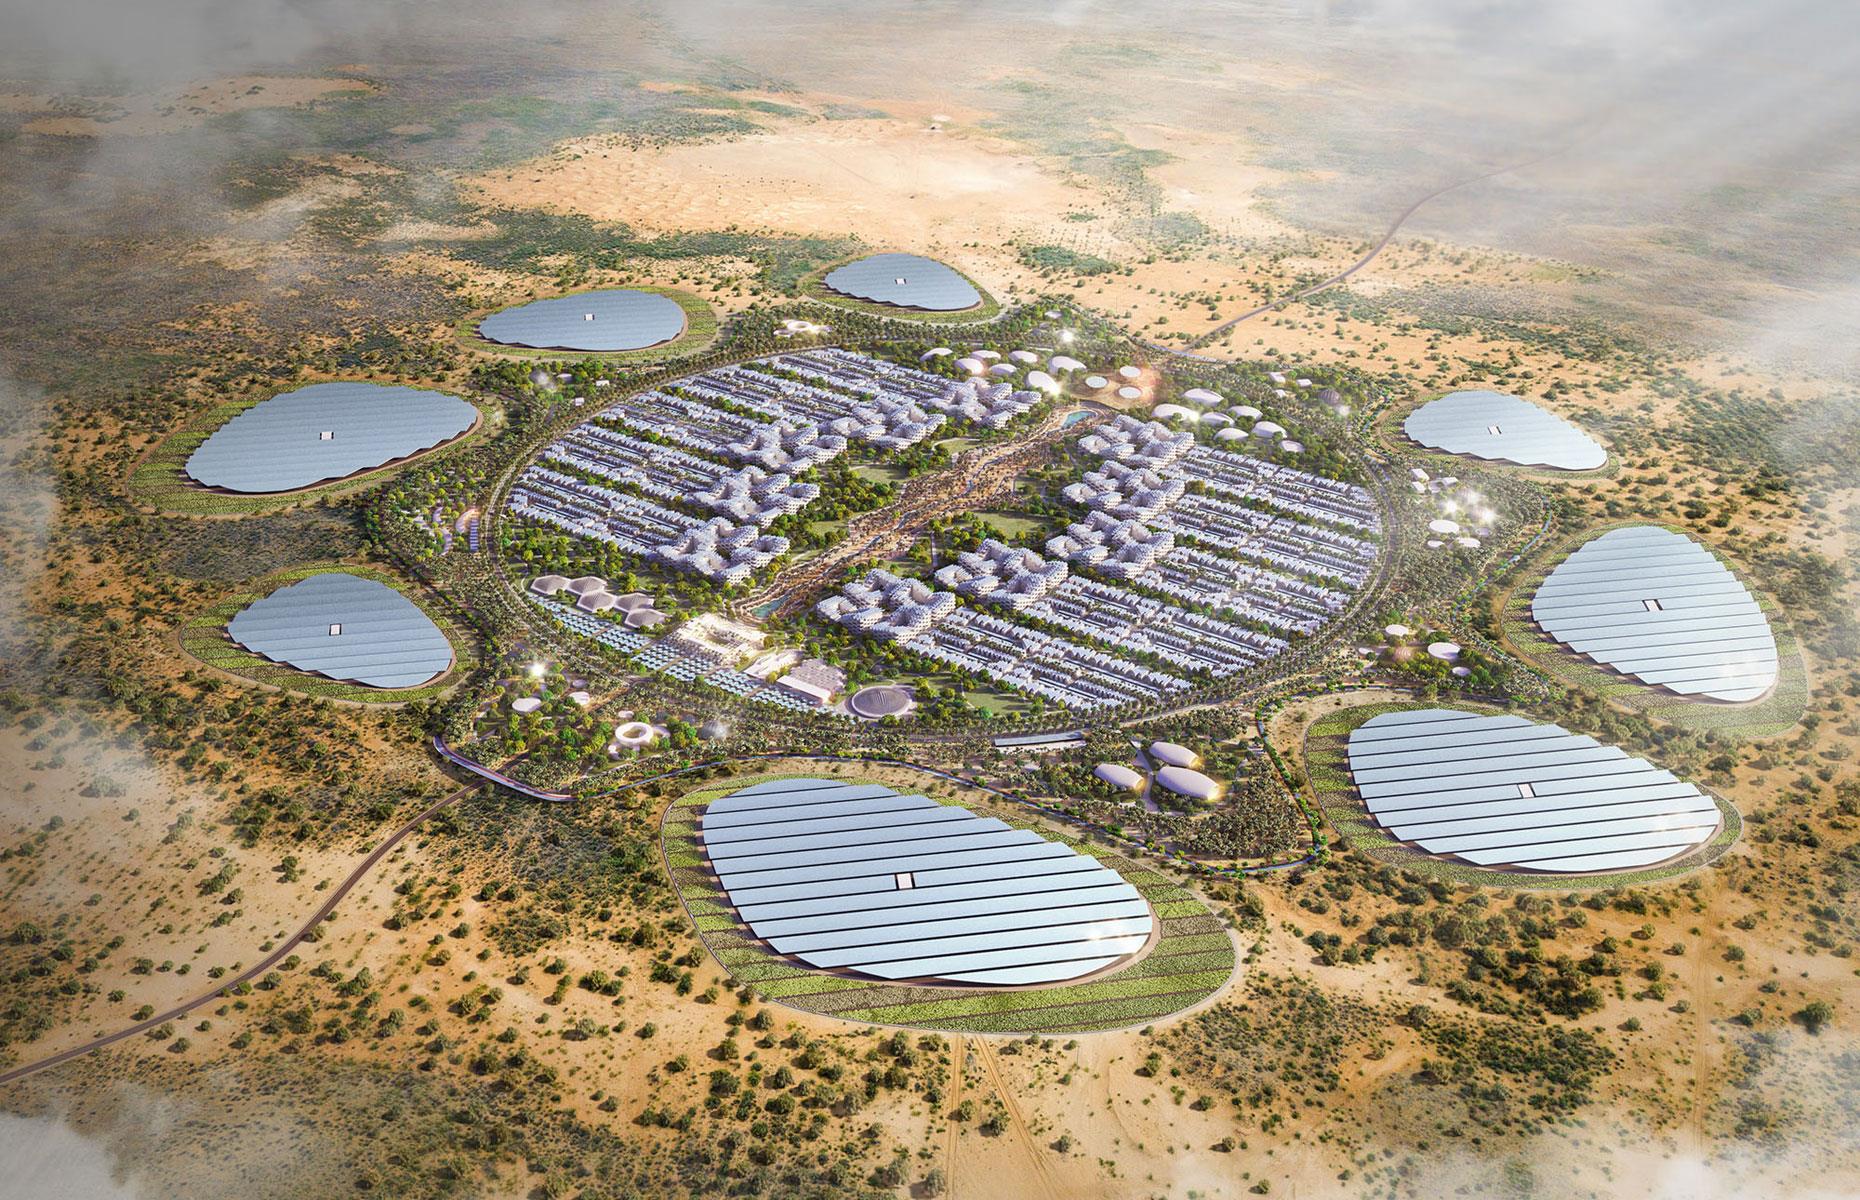 <p>A green energy powerhouse in the desert just to the east of Cairo, <a href="https://urb.ae/projects/nexgensustainablecity/">Nexgen Sustainable City</a> is another groundbreaking future city from URB. Sharing many design elements with XZero City, the community will produce more energy and food than it consumes the developer has assured, which would make Nexgen the world's first climate-positive city.</p>